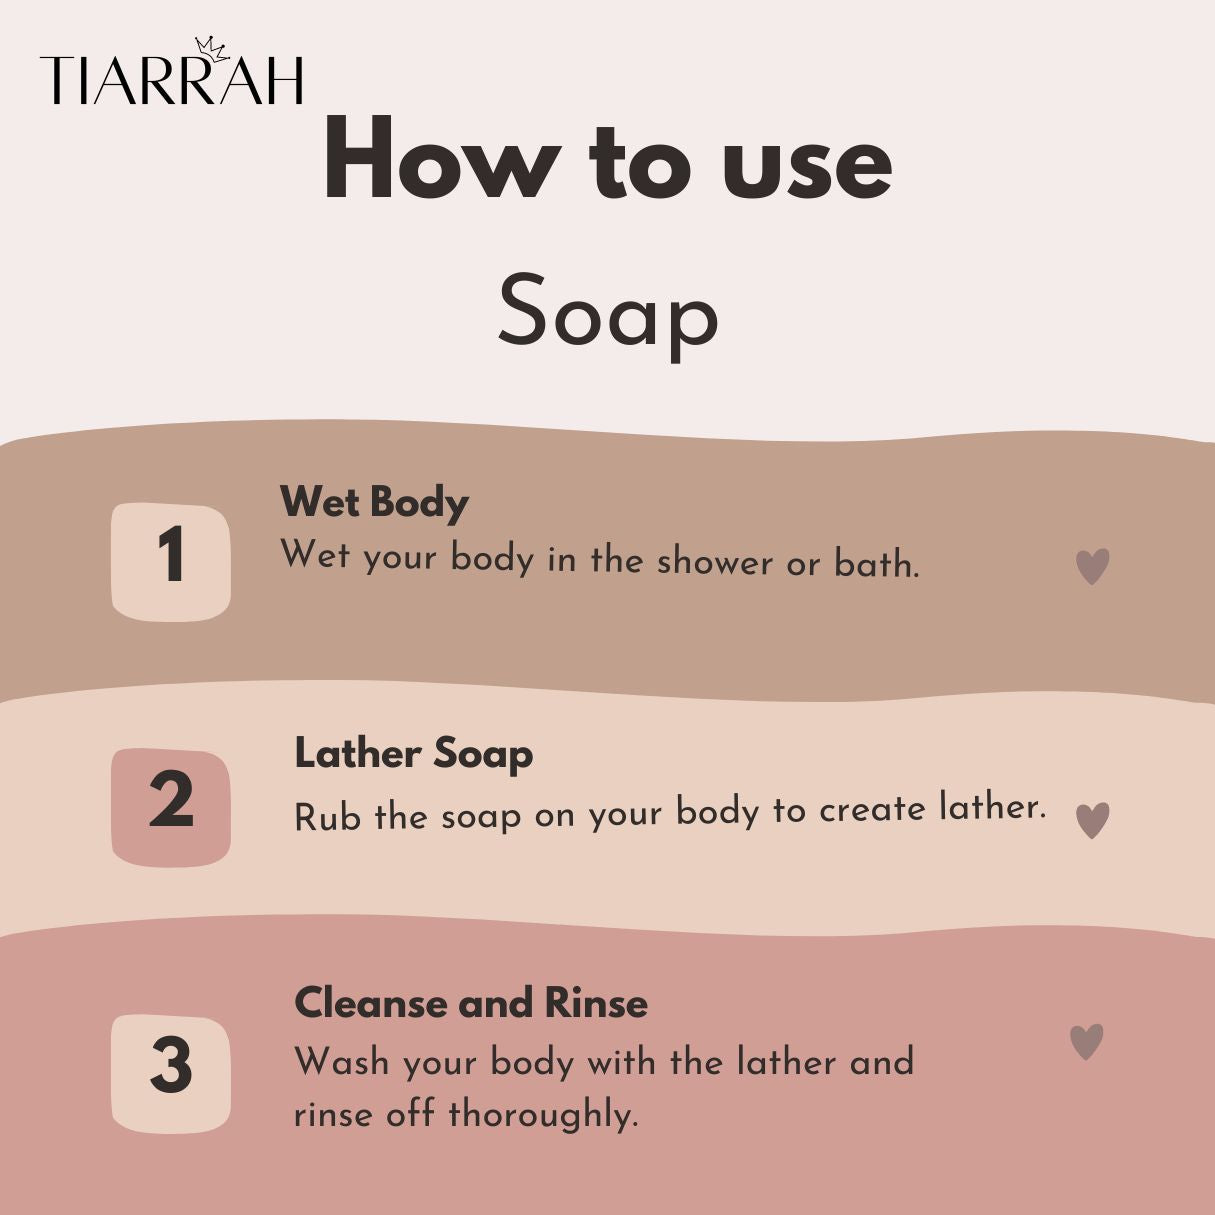 Luxury Citrus Soap by Tiarrah: Organic, Non-Toxic - The Luxury Bath and Body Care Shop